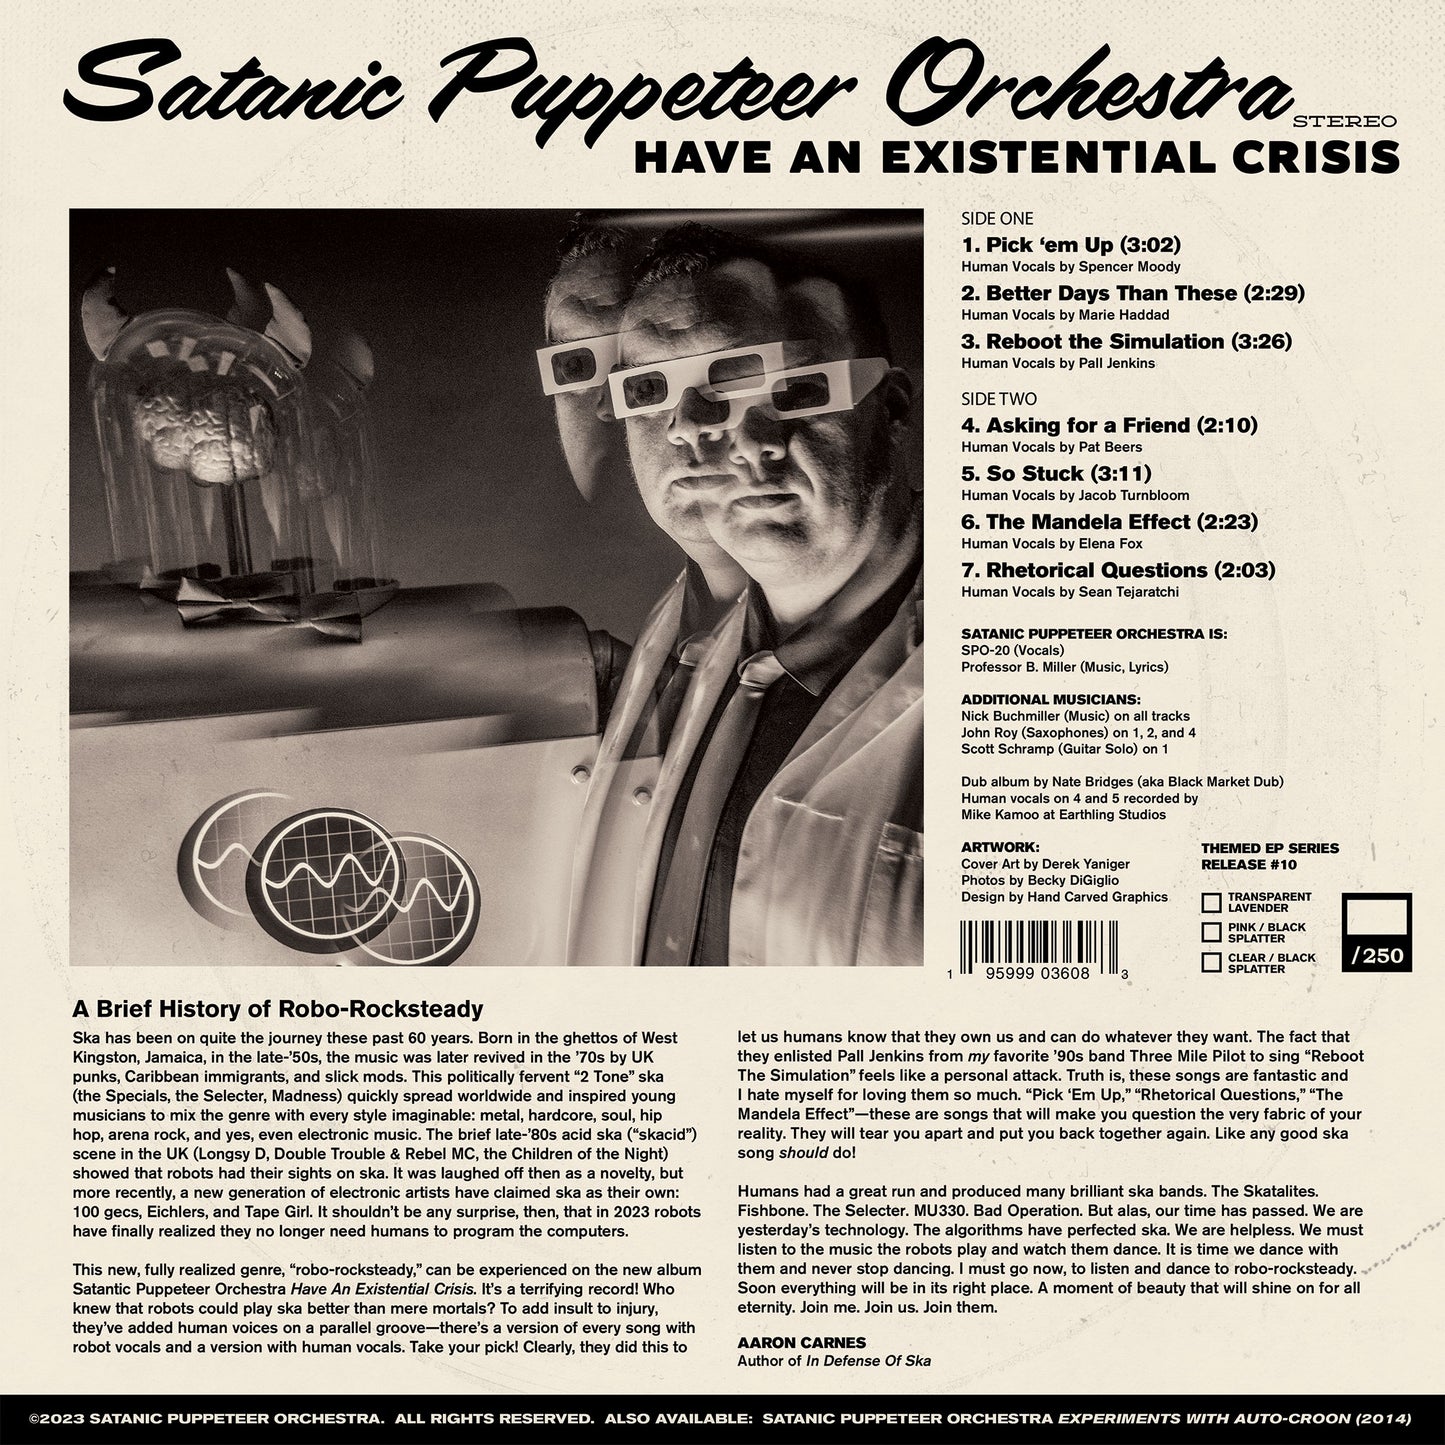 Satanic Puppeteer Orchestra "Have an Existential Crisis" 12"